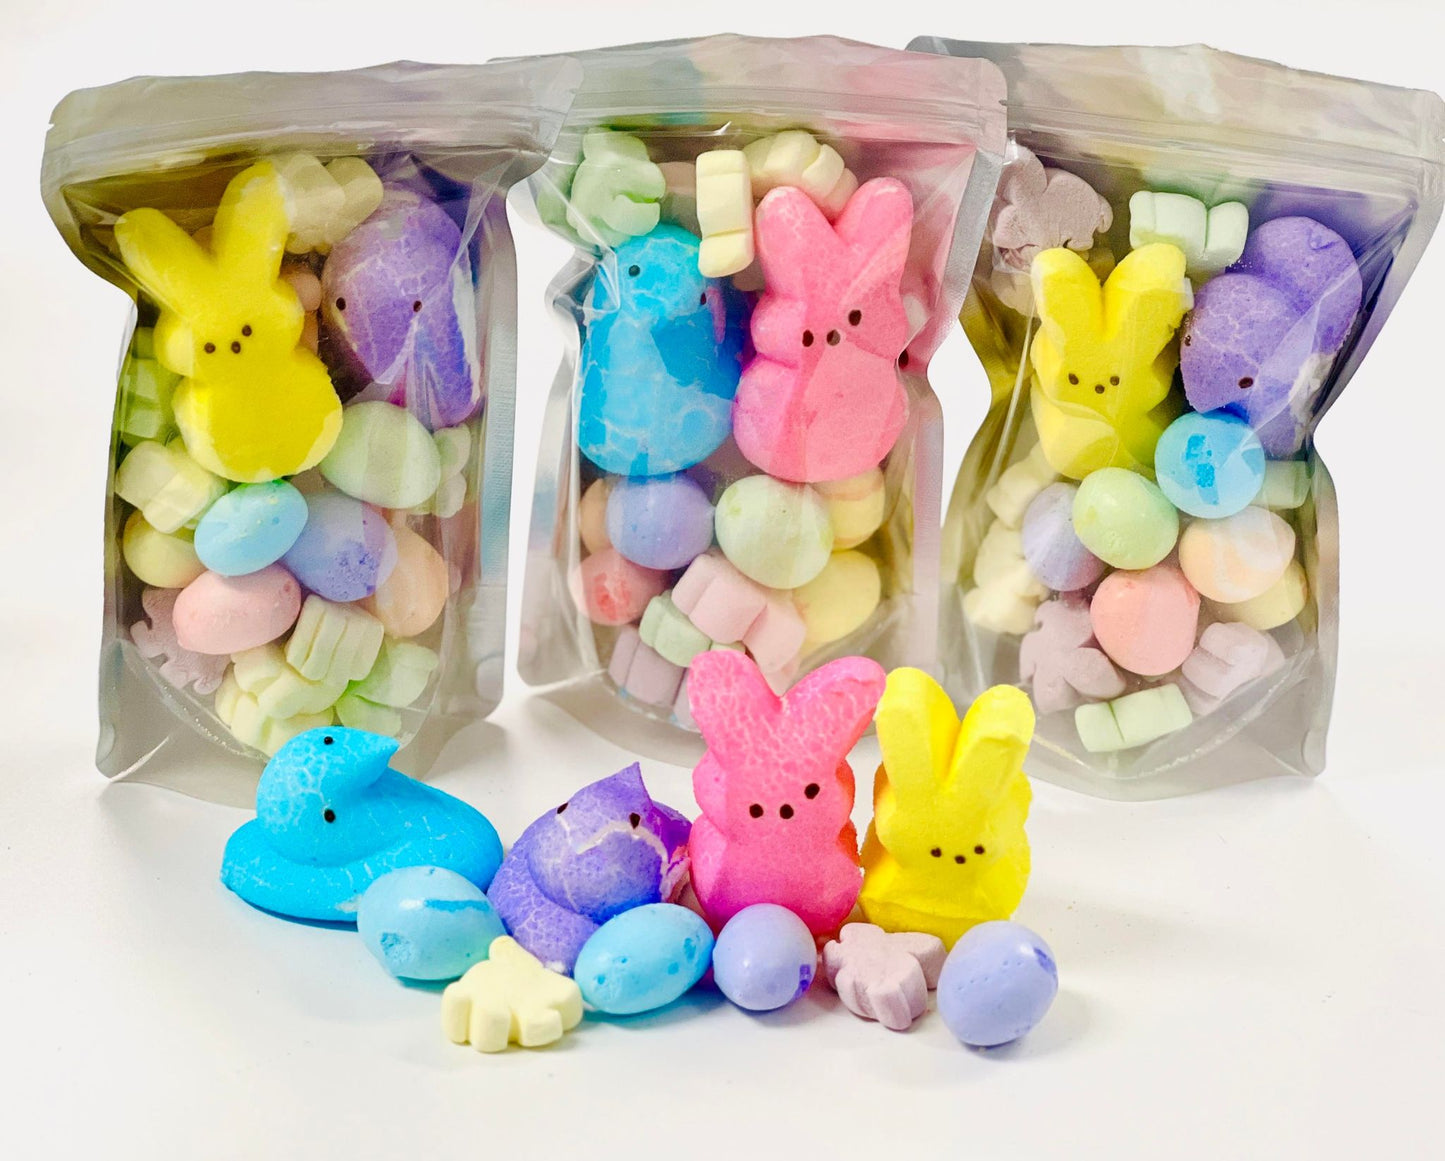 Freeze Dried Easter Mix